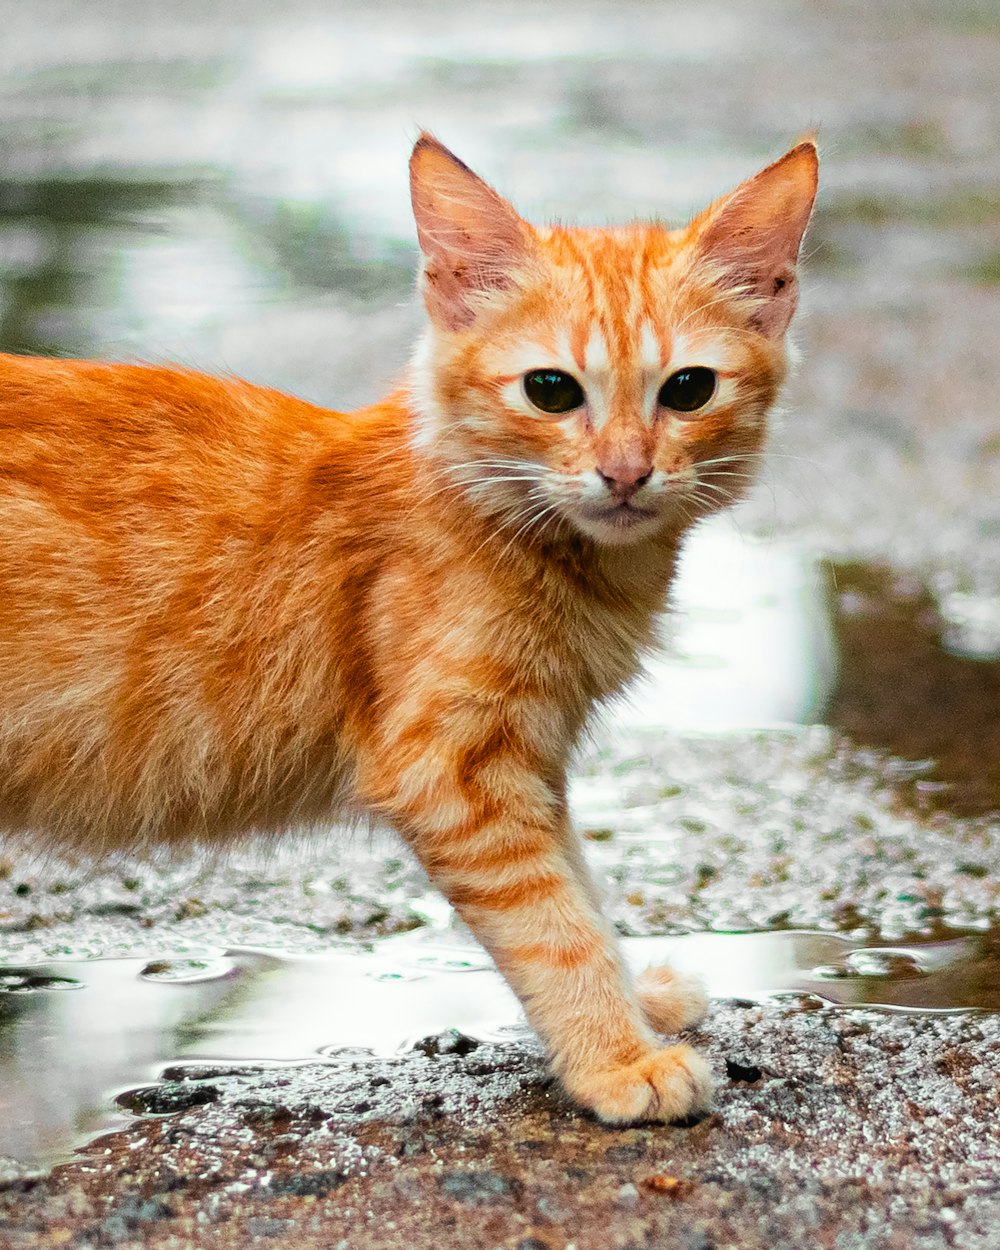 a small orange cat standing on top of a wet ground